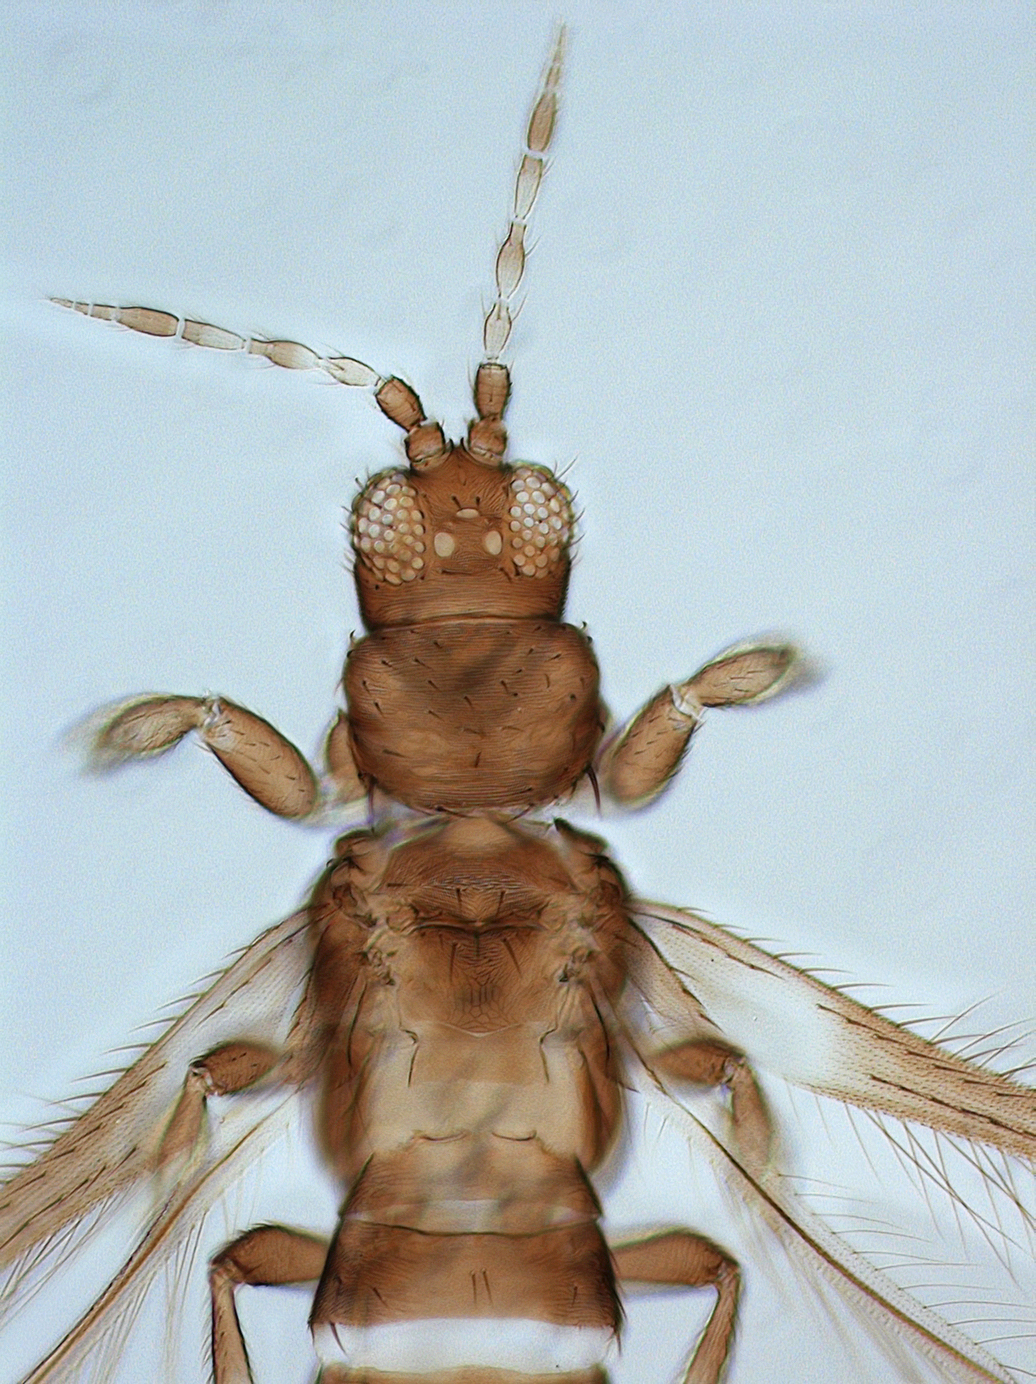 Enneothrips fuscus